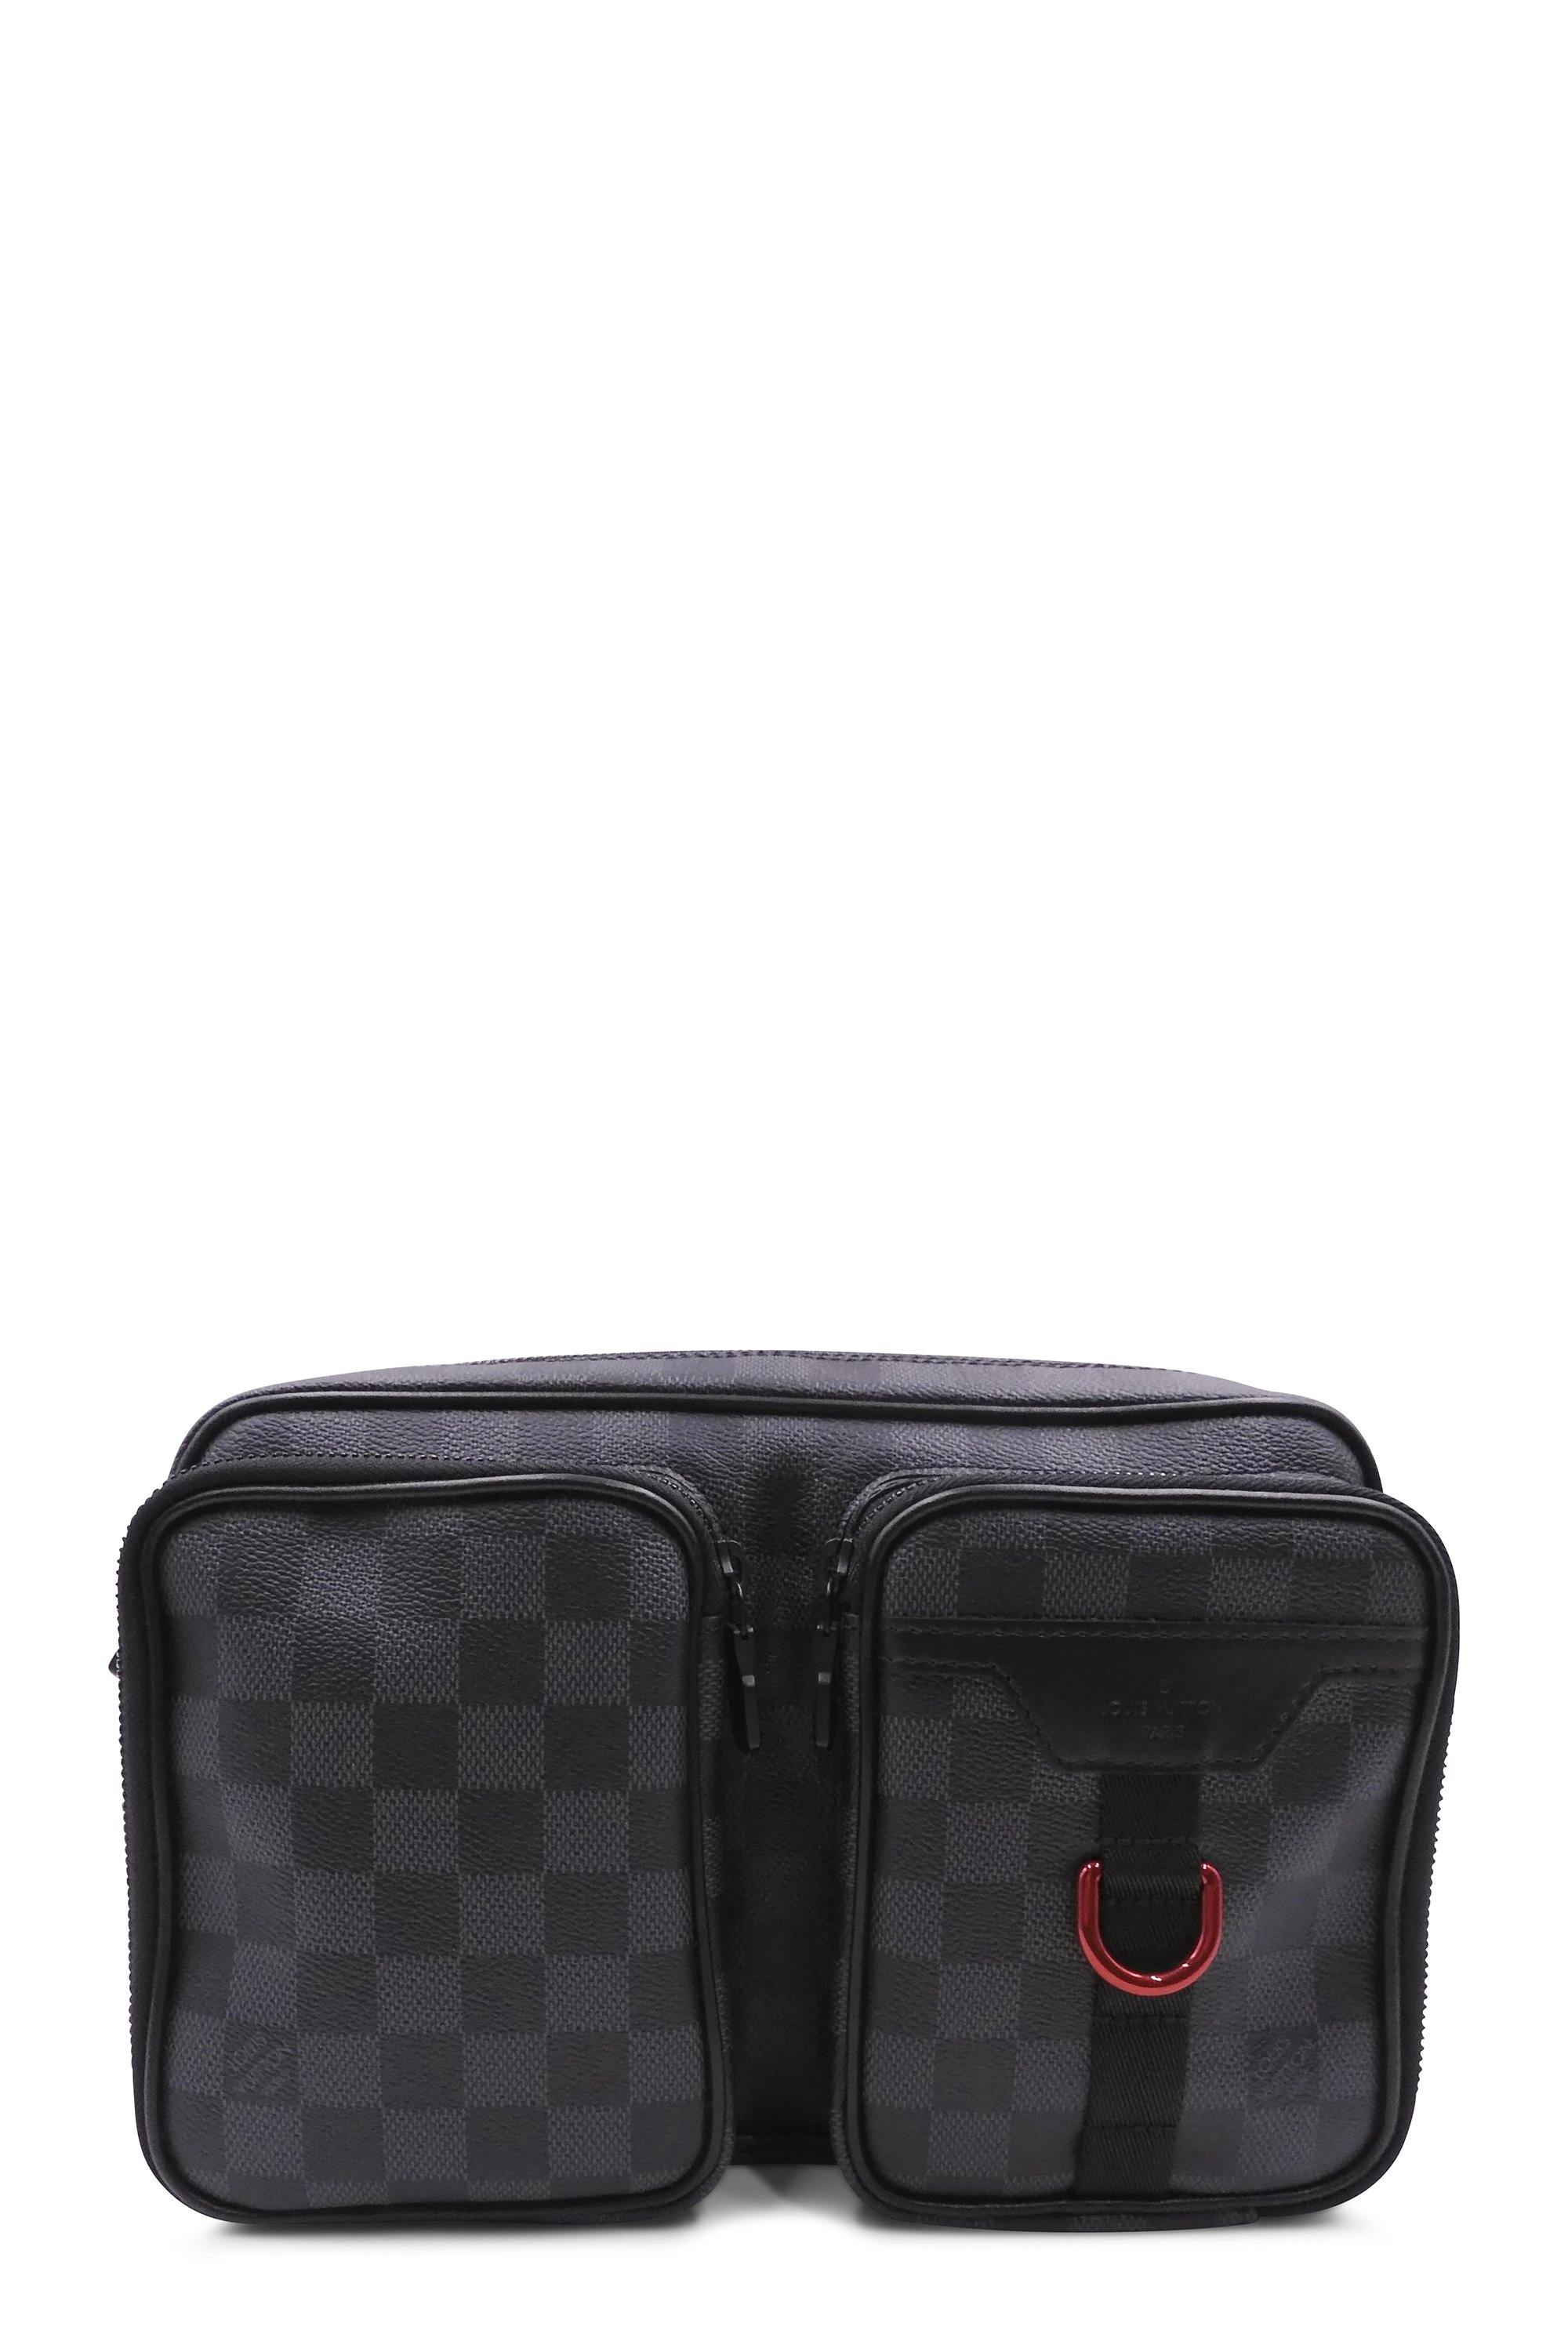 Authenticated Used LOUIS VUITTON Louis Vuitton Utility Supple Clutch Bag  Second Damier Graphite Men's N60324 Black Red Metal Fittings 